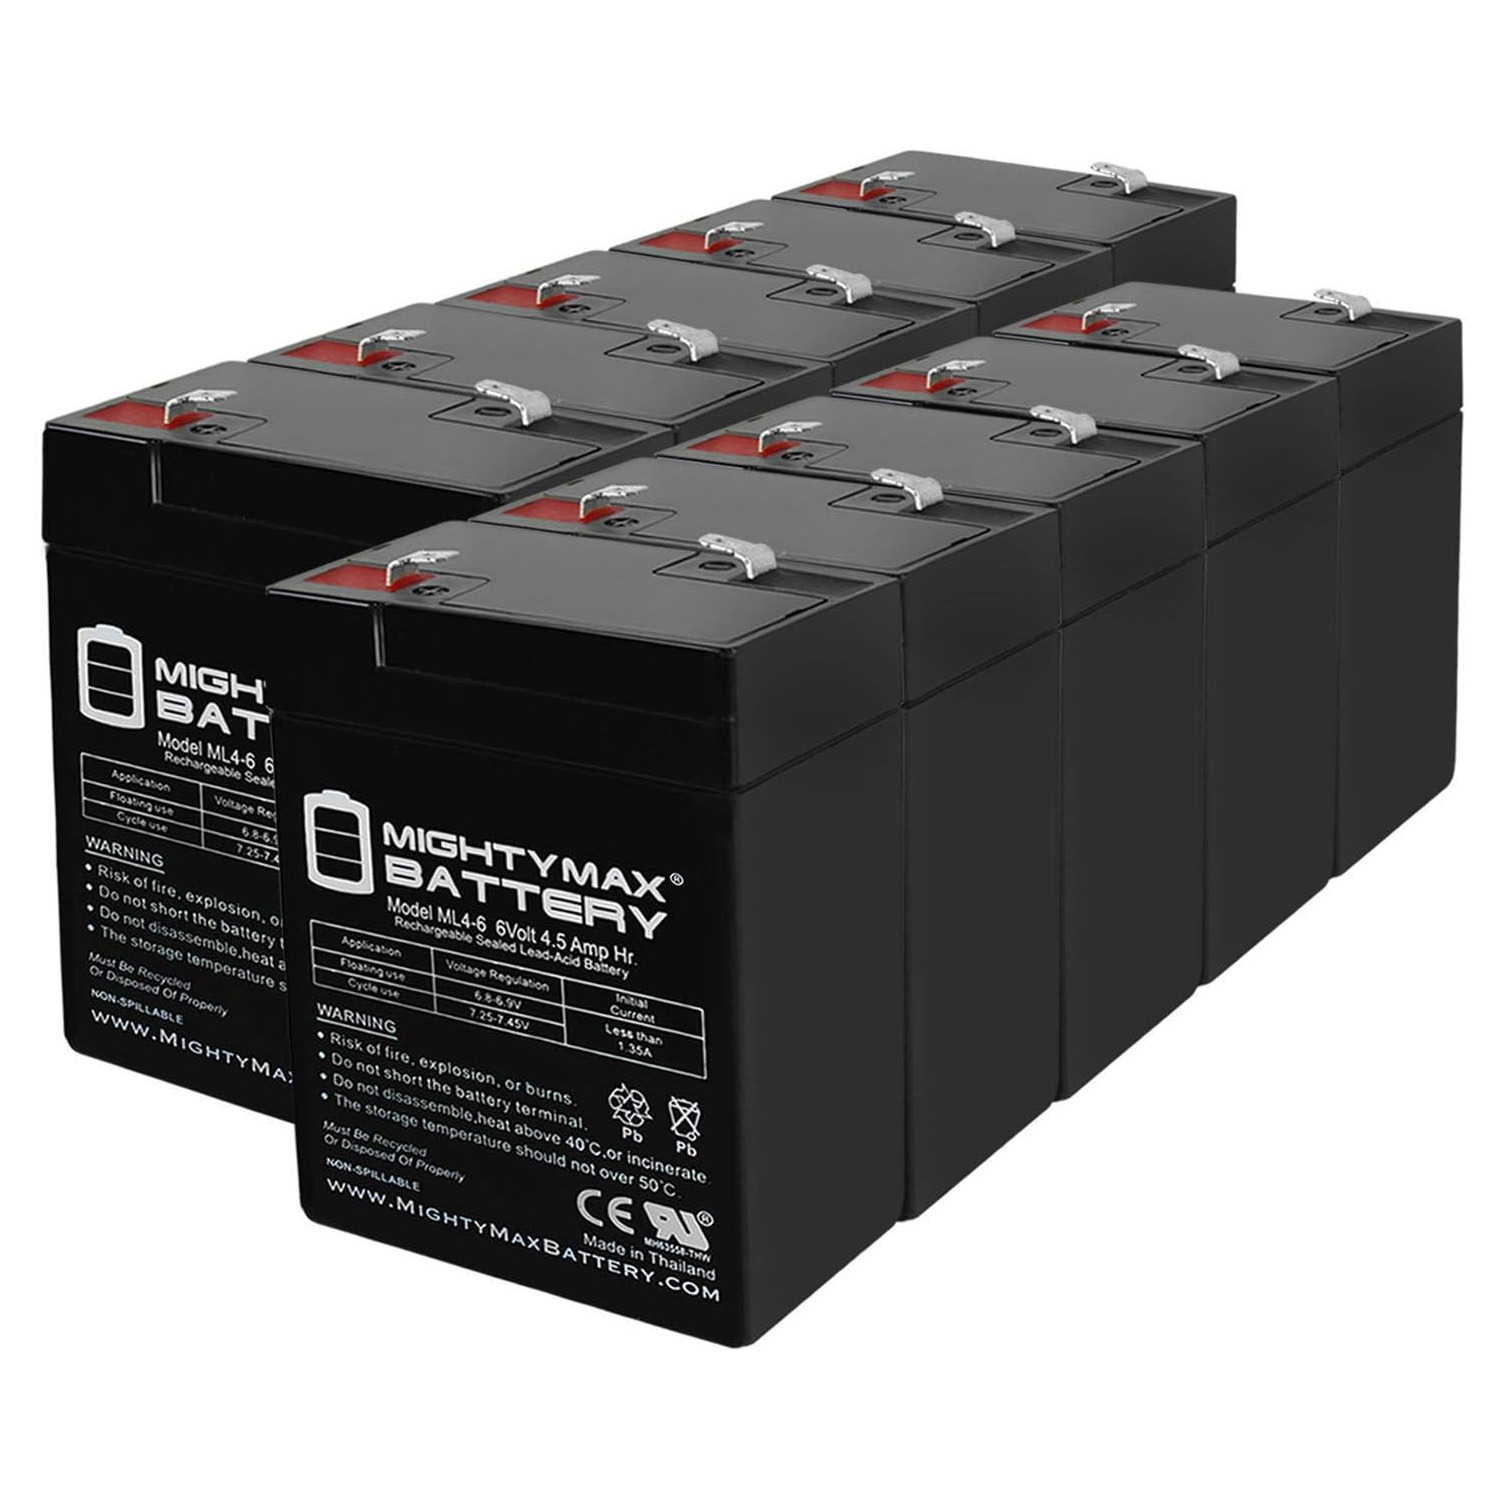 ML4-6 - 6V 4.5AH Lithonia H2NS1 R Replacement Battery - 10 Pack